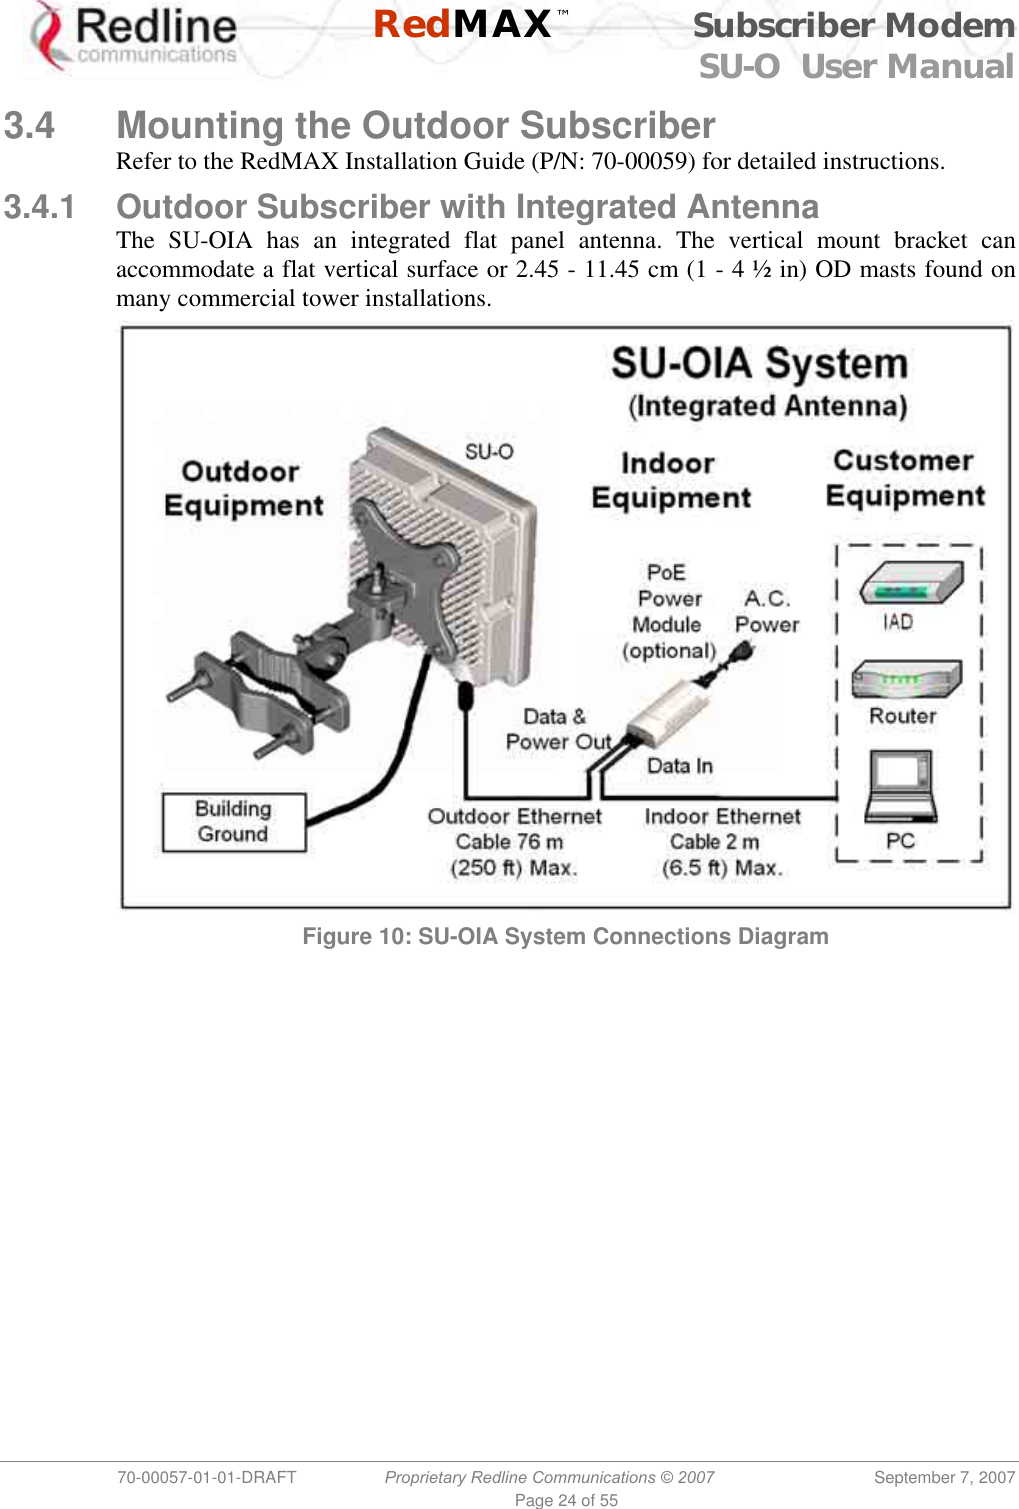    RedMAX™ Subscriber Modem SU-O  User Manual  70-00057-01-01-DRAFT  Proprietary Redline Communications © 2007 September 7, 2007 Page 24 of 55  3.4  Mounting the Outdoor Subscriber Refer to the RedMAX Installation Guide (P/N: 70-00059) for detailed instructions. 3.4.1  Outdoor Subscriber with Integrated Antenna The SU-OIA has an integrated flat panel antenna. The vertical mount bracket can accommodate a flat vertical surface or 2.45 - 11.45 cm (1 - 4 ½ in) OD masts found on many commercial tower installations.  Figure 10: SU-OIA System Connections Diagram  